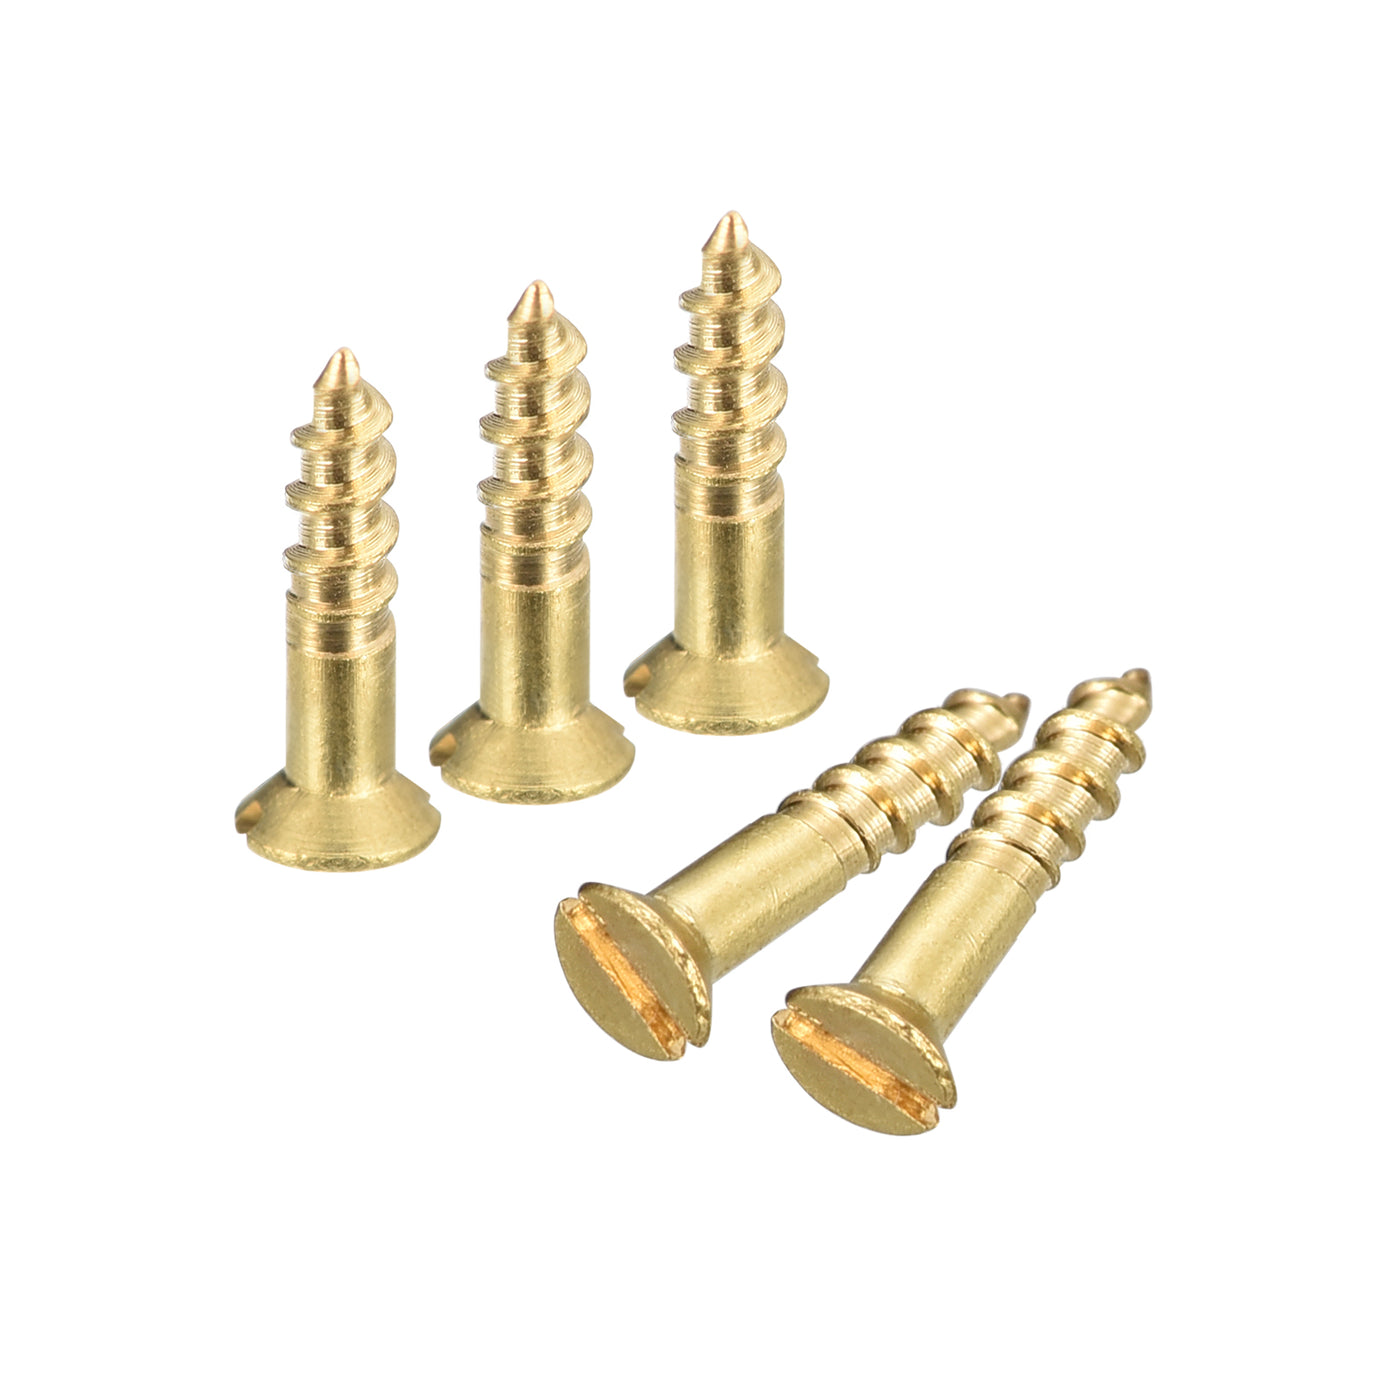 uxcell Uxcell 50Pcs M2 x 8mm Brass Slotted Drive Flat Head Wood Screws Self Tapping Screw